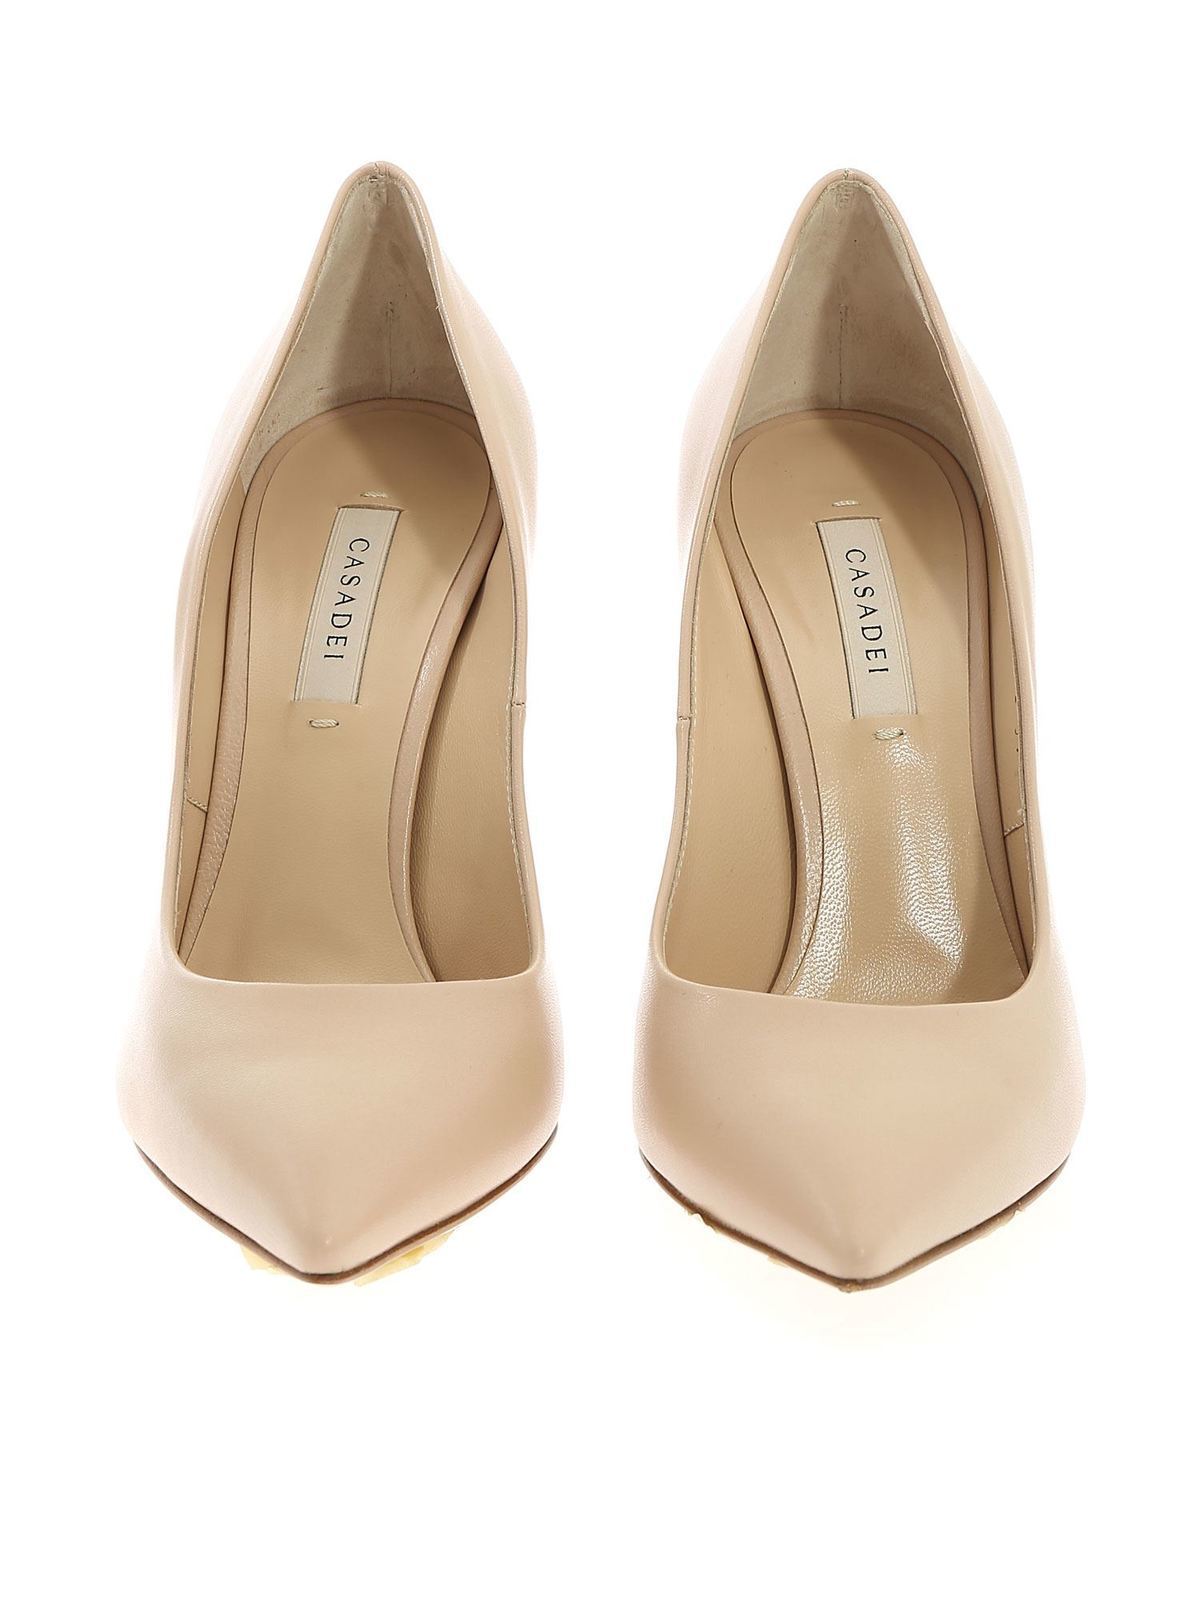 Court shoes - Blade pumps in nude color - 1F161D100MADUSE2801